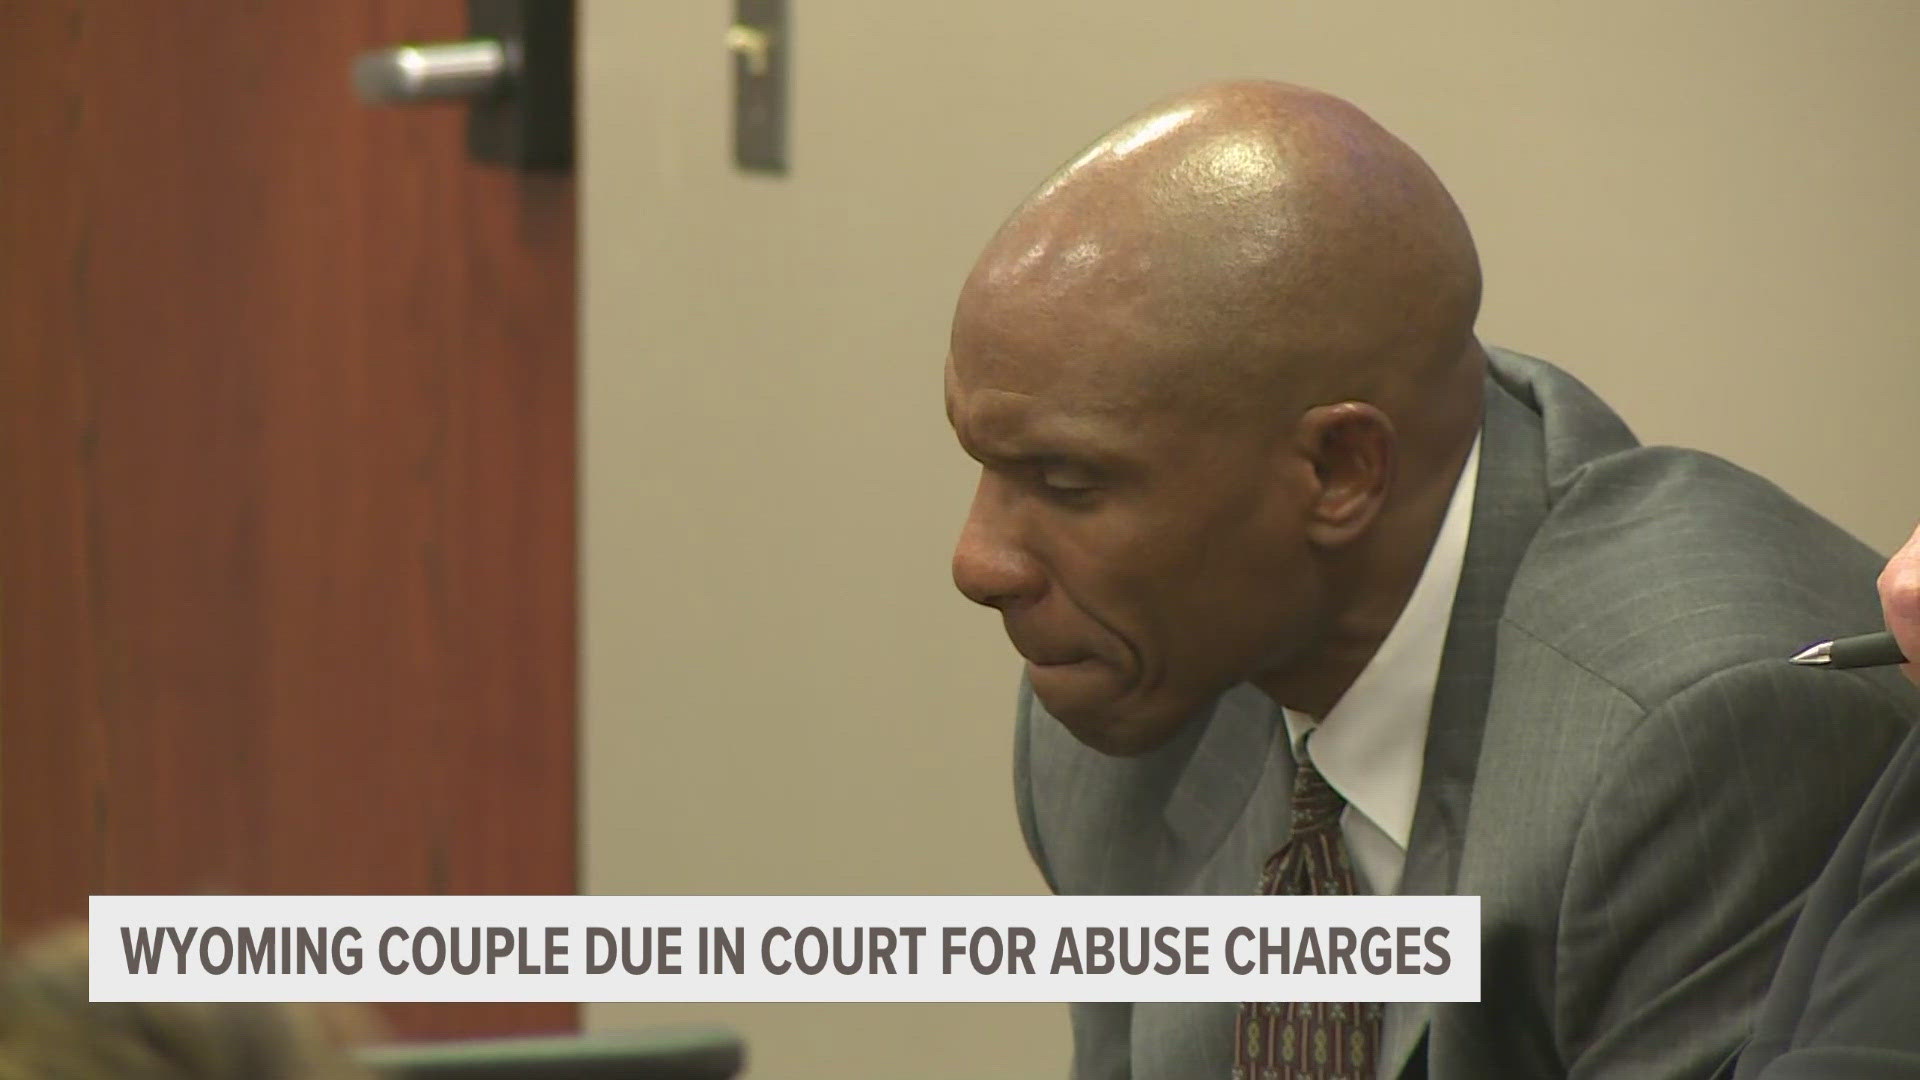 A Wyoming couple accused of abusing their adoptive children appeared in court Tuesday.